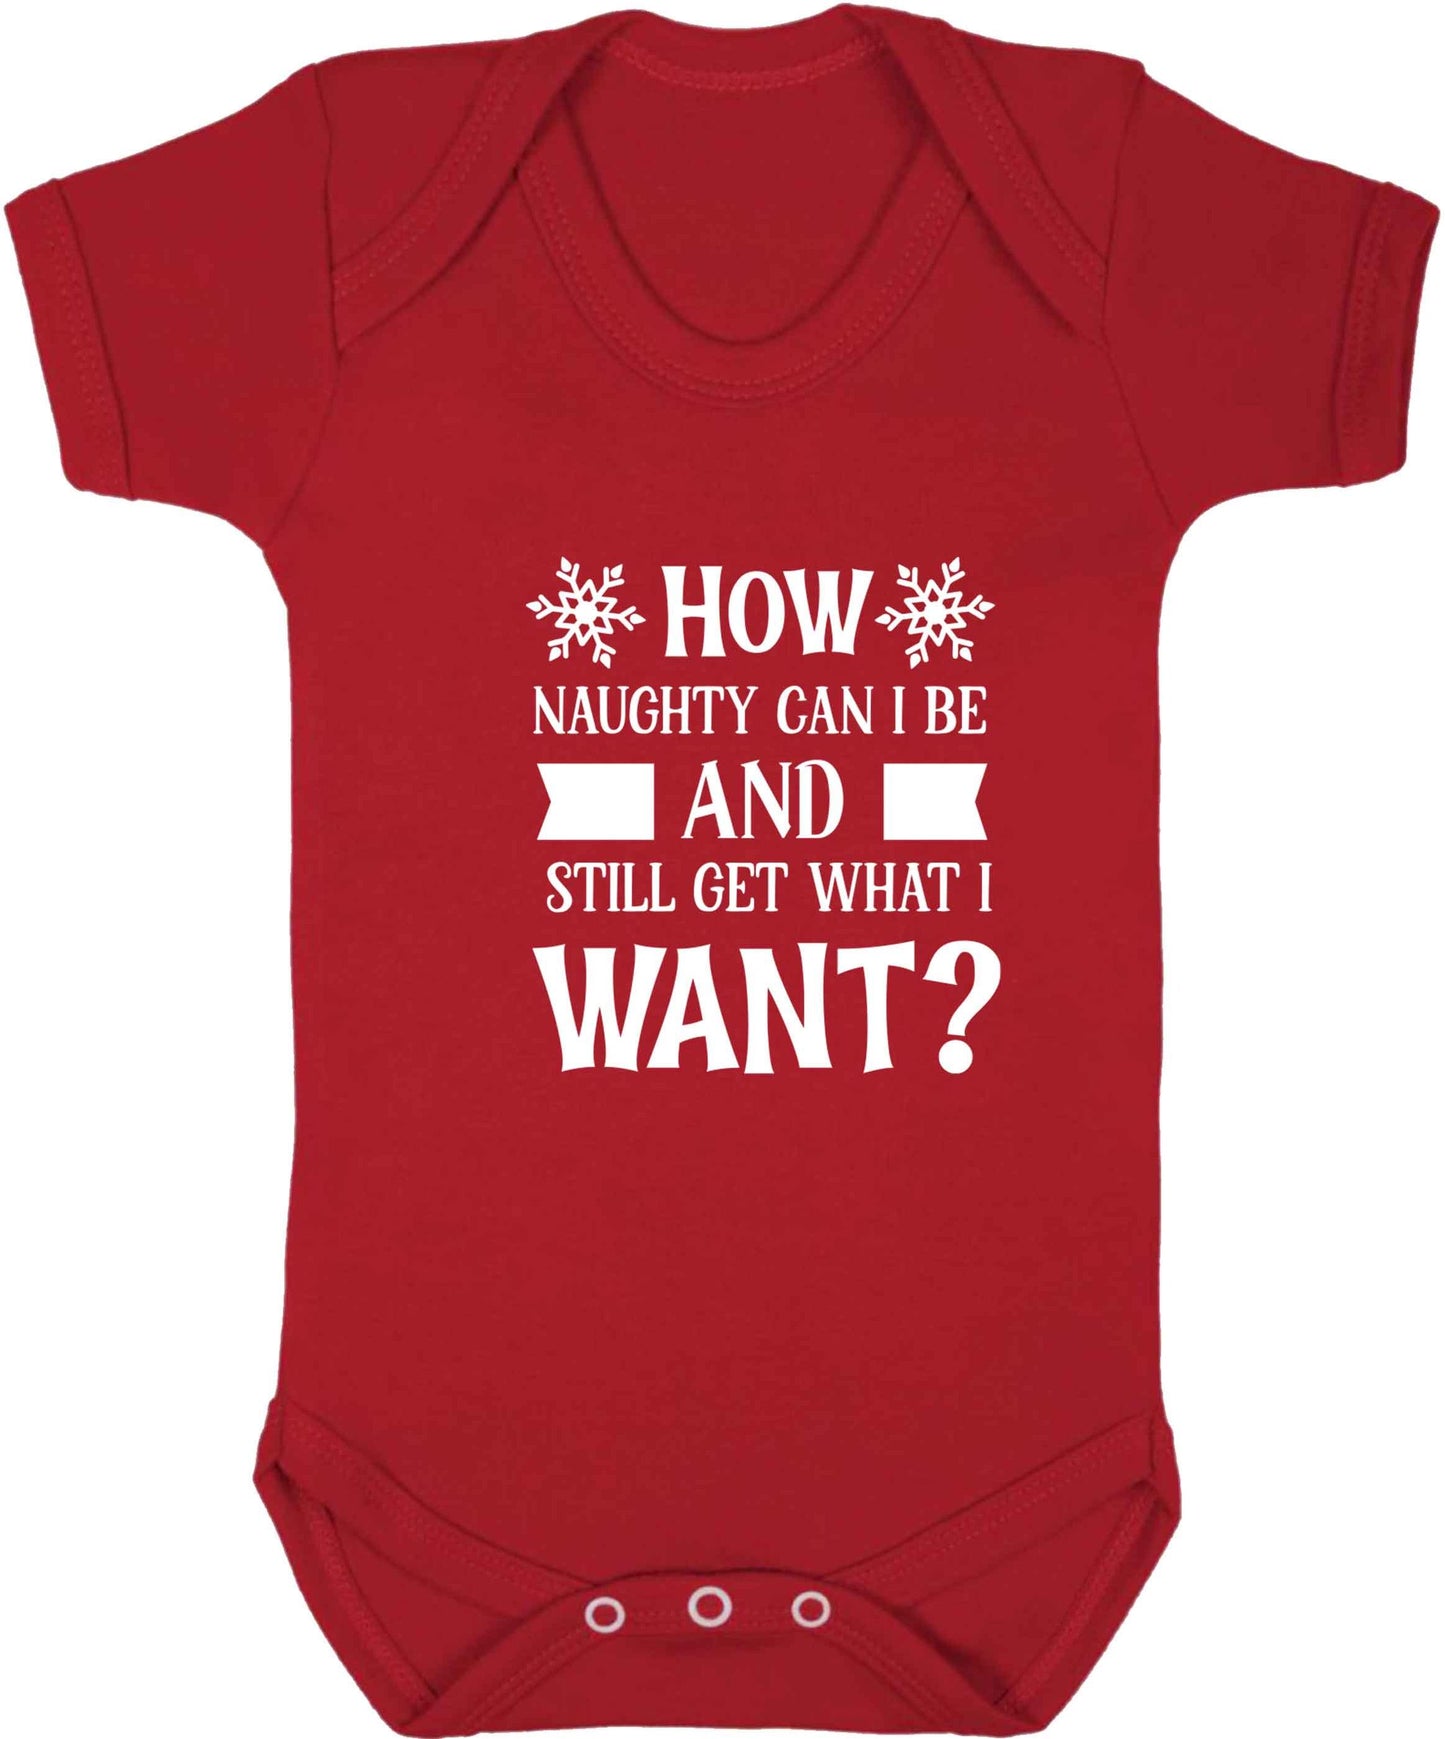 How naughty can I be and still get what I want? baby vest red 18-24 months